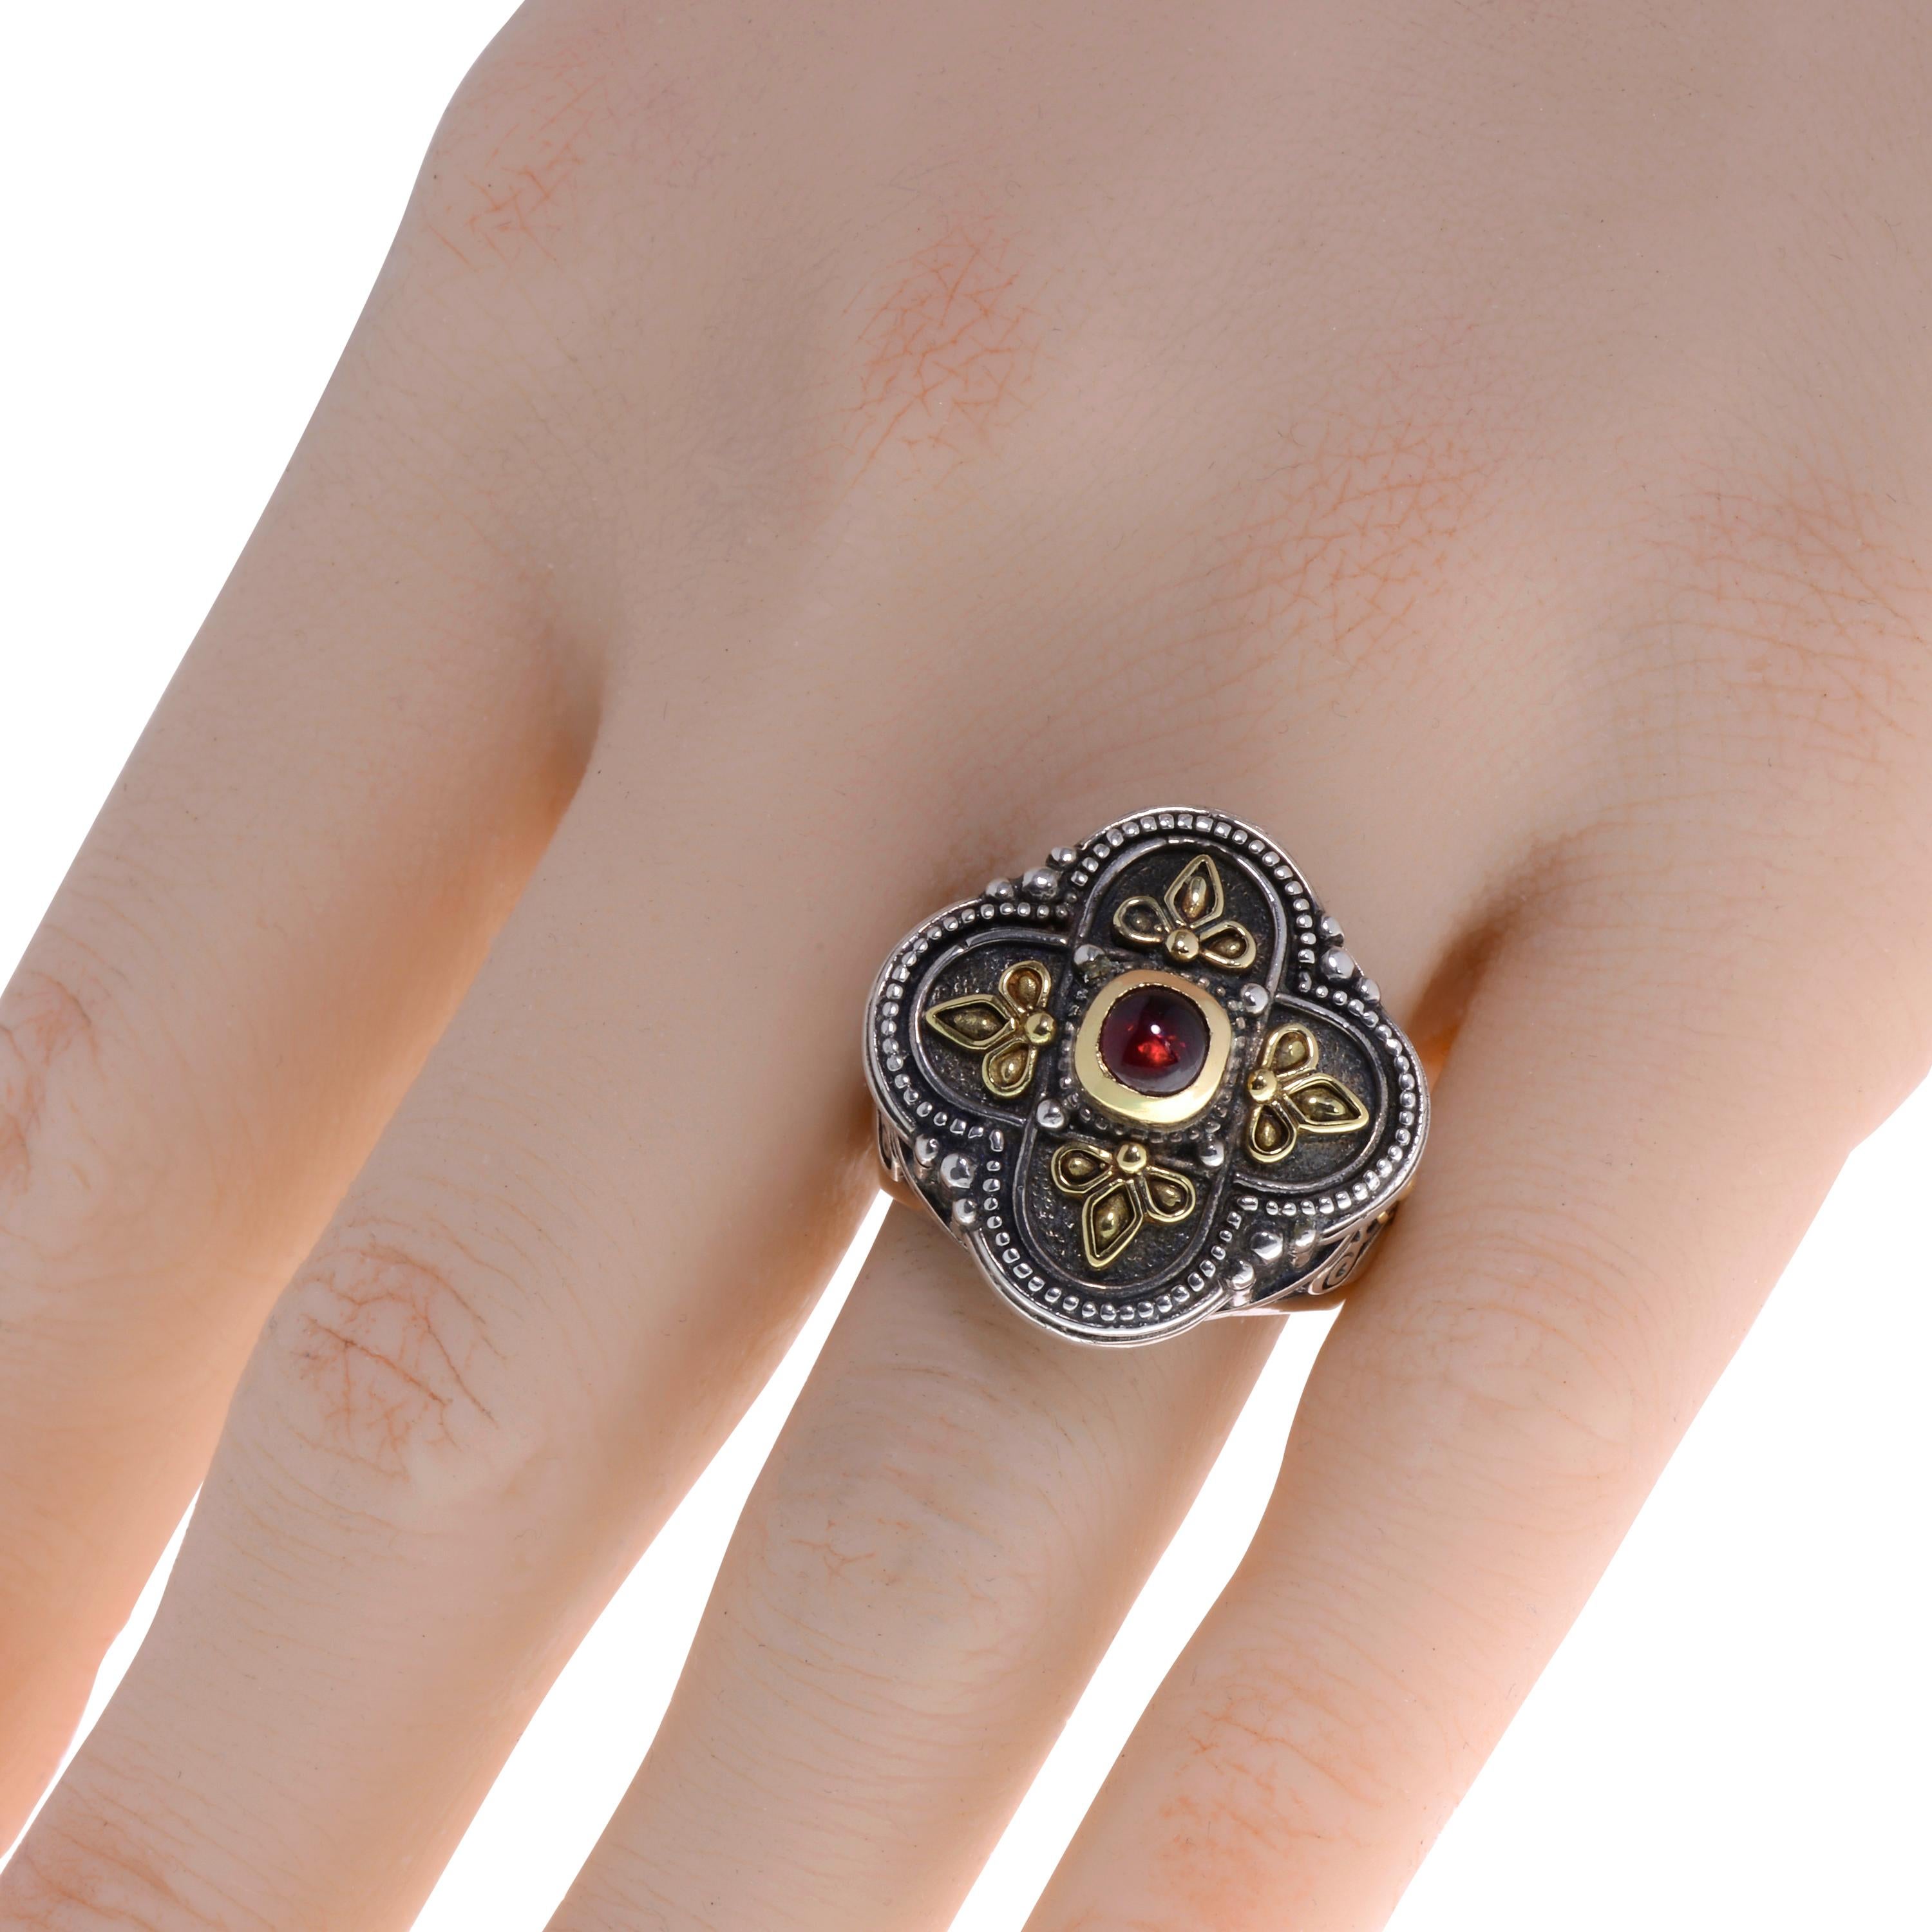 This adventurous Konstantino ring features a cabochon garnet set in 18K yellow gold on an engraved and oxidized sterling silver band. The decoration size is 7/8”. The weight is 19g. The ring size is 7.75 (56.4). 
